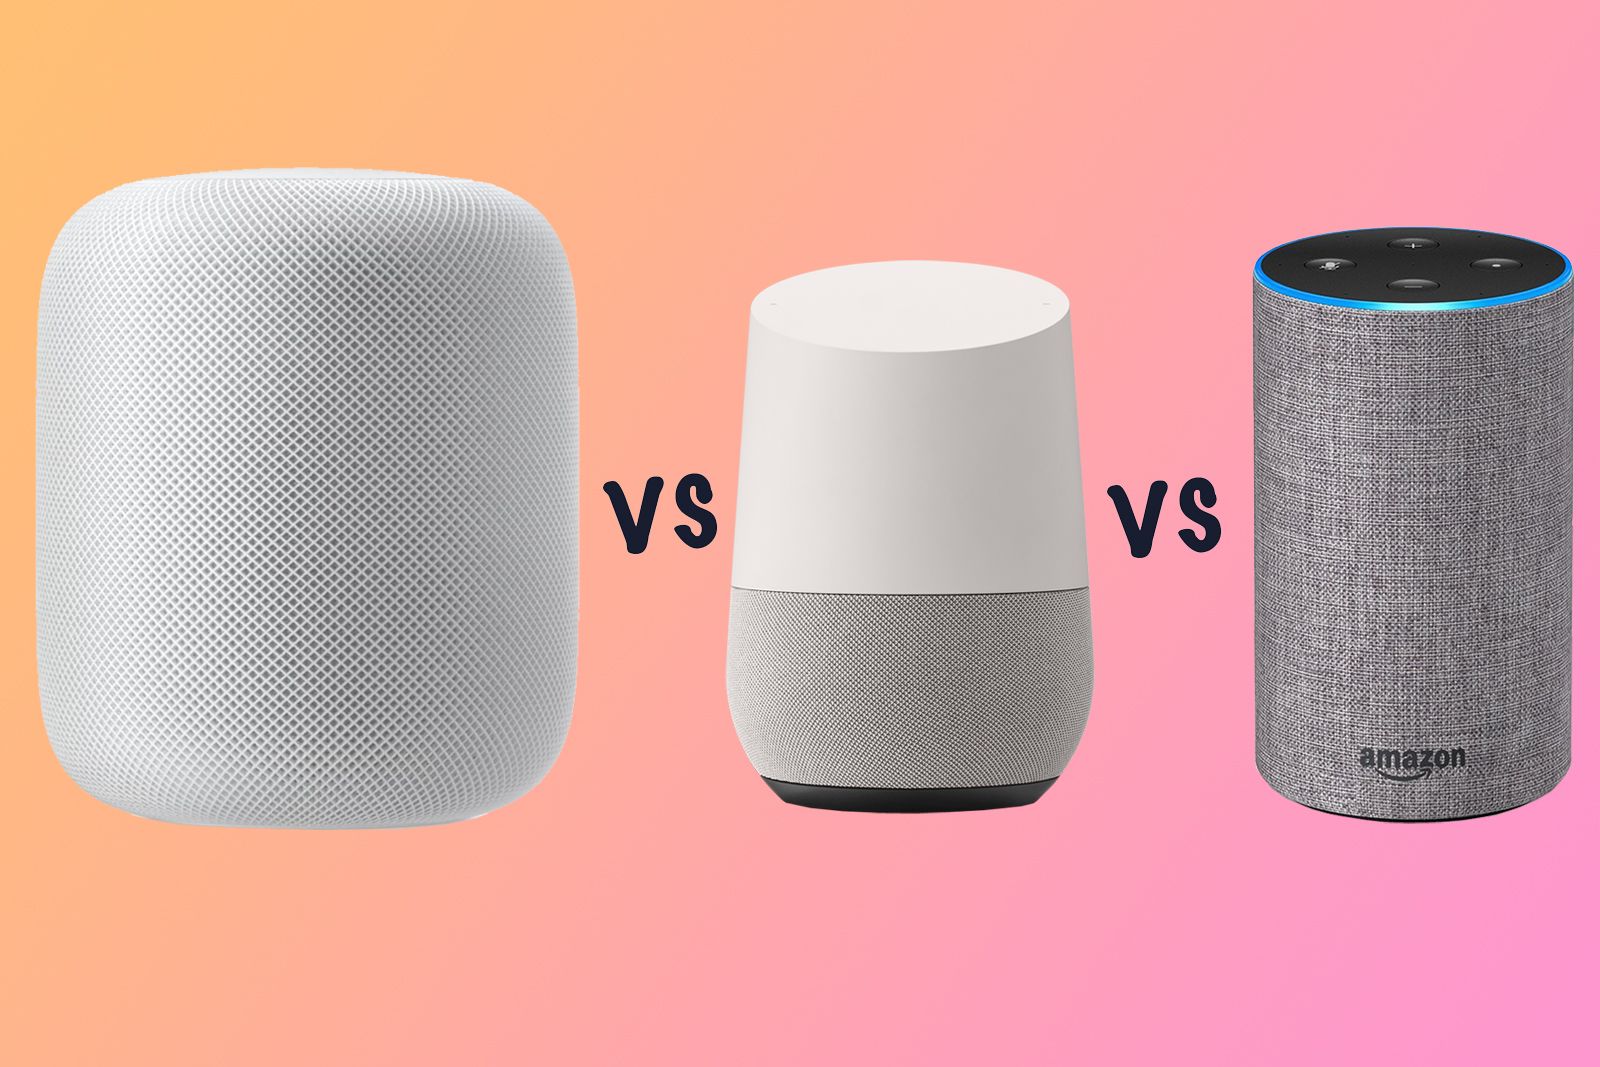 Apple Homepod Vs Google Home Vs Amazon Echo What S The Difference image 1